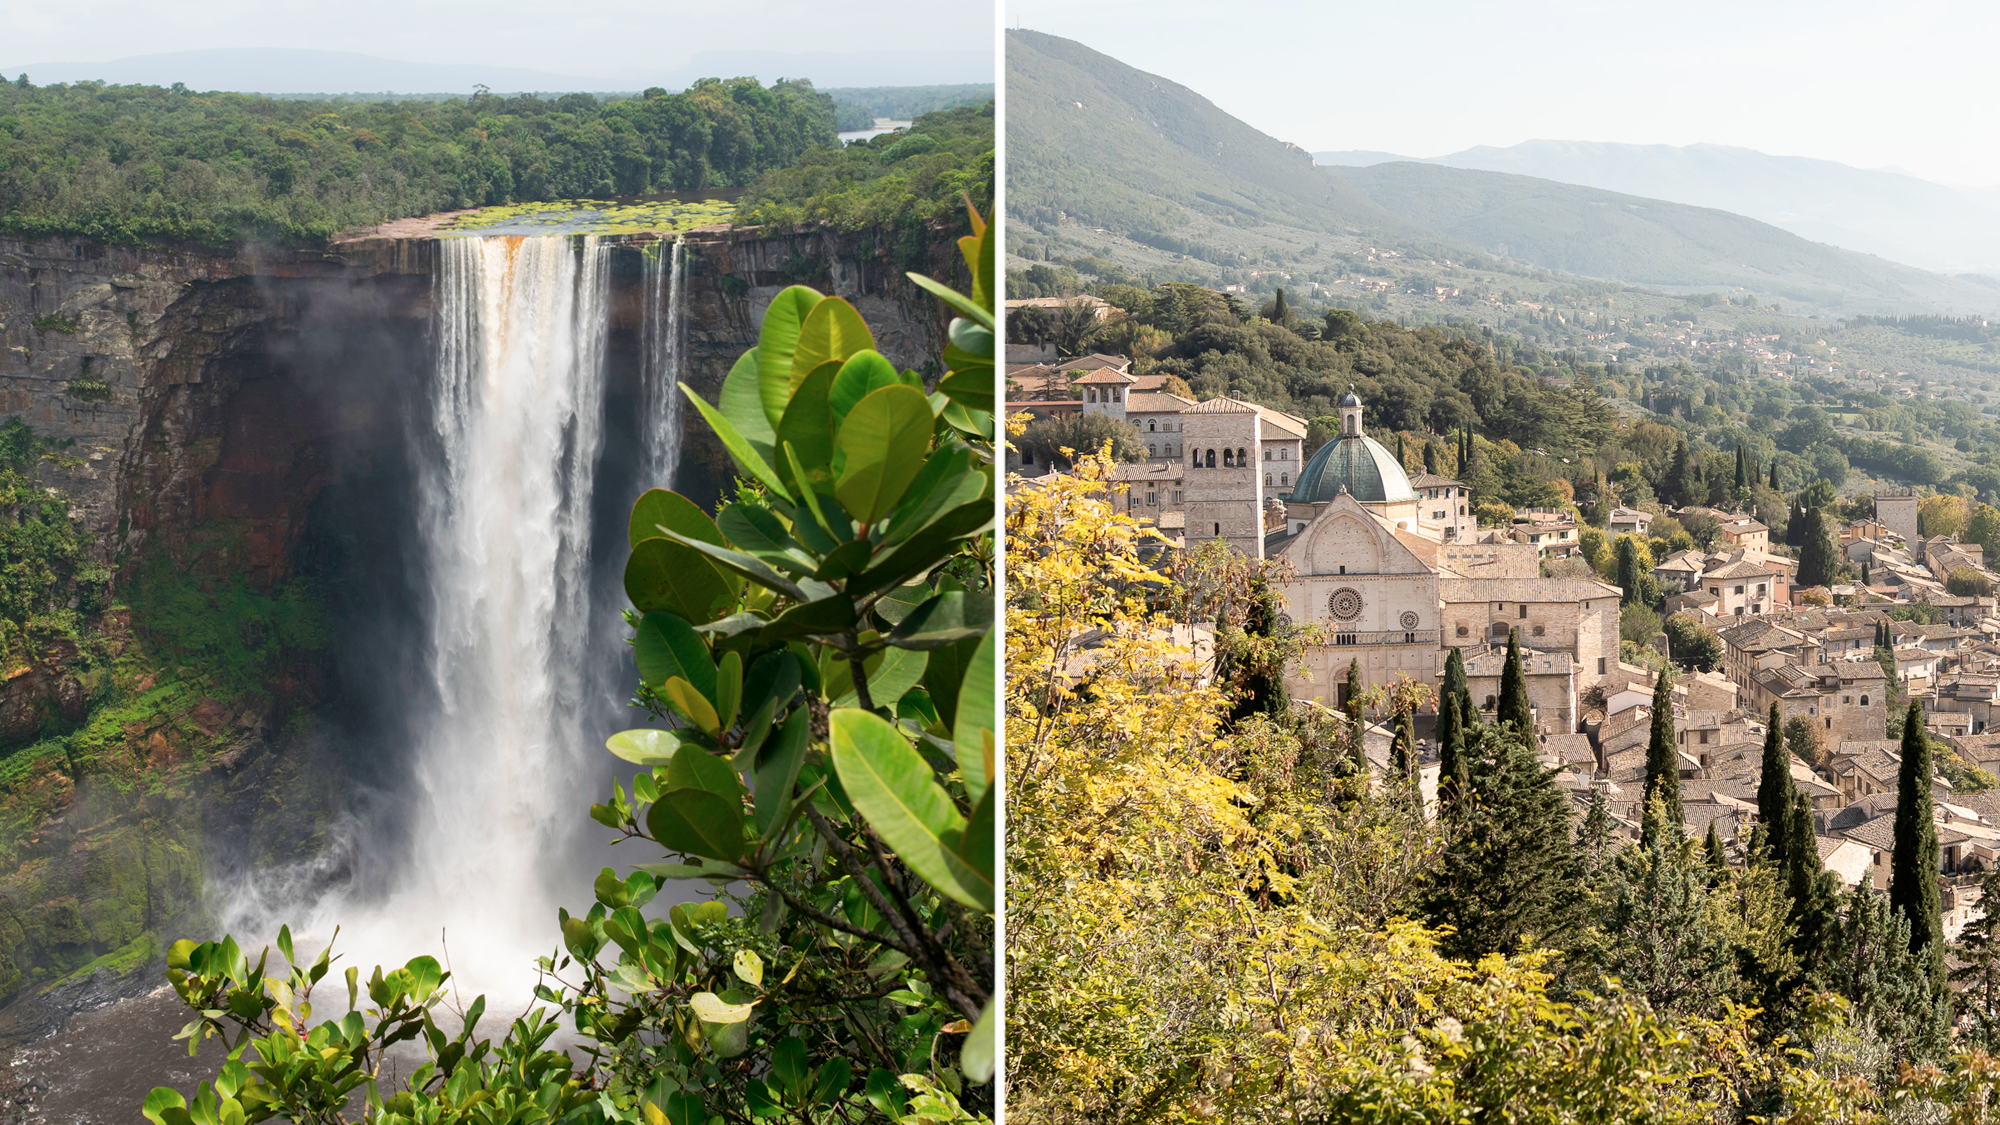 Guyana's natural wonders are exceptional; Assisi's cobbled streets are beautiful in the autumn.